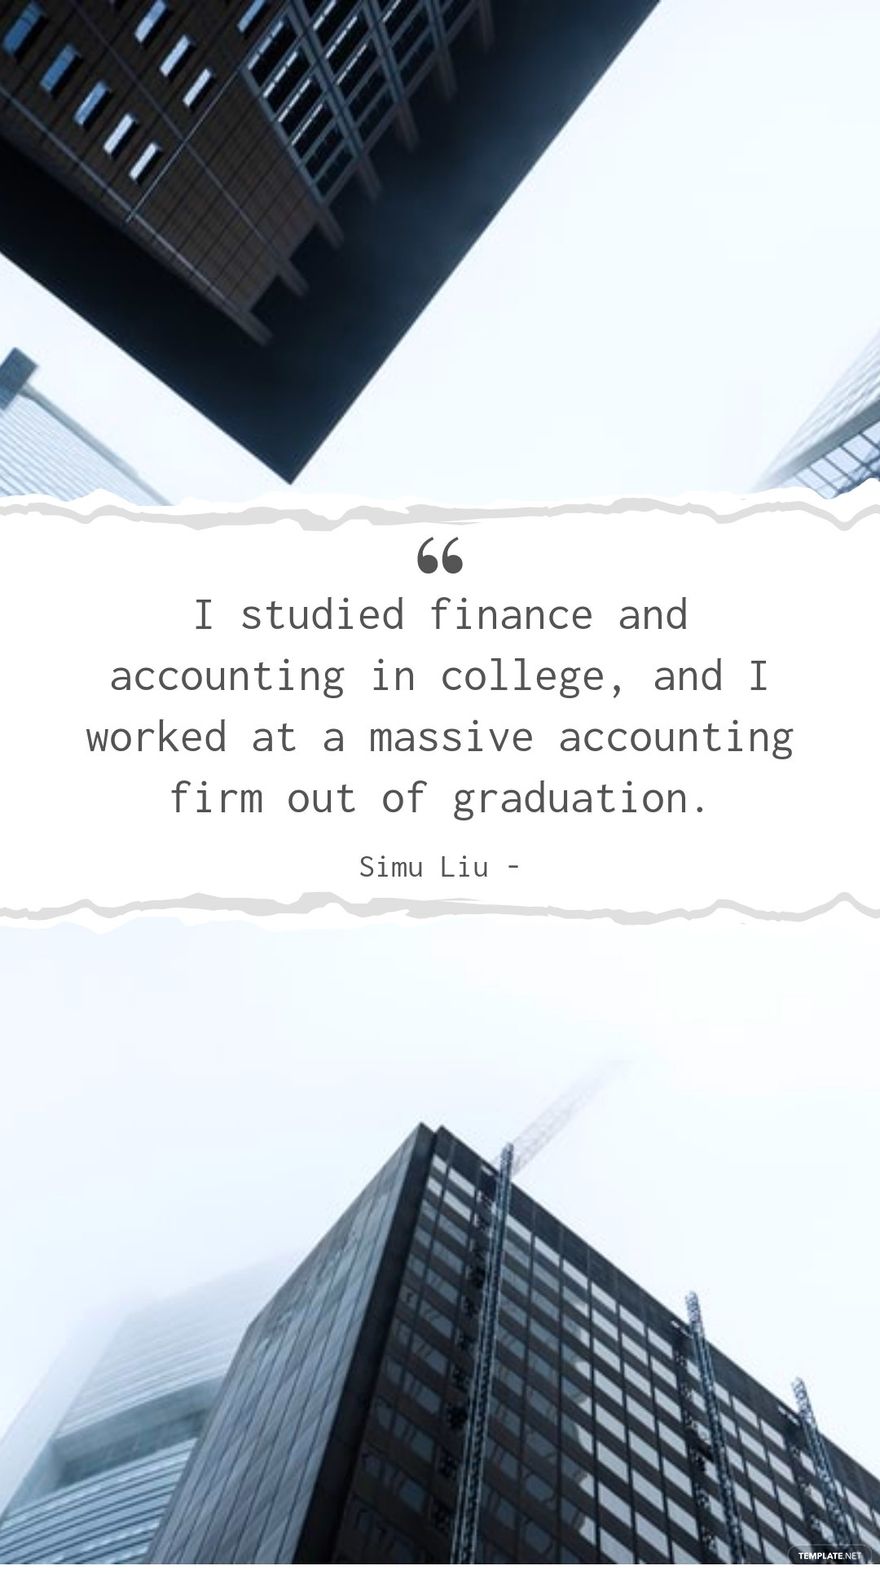 Simu Liu - I studied finance and accounting in college, and I worked at a massive accounting firm out of graduation.